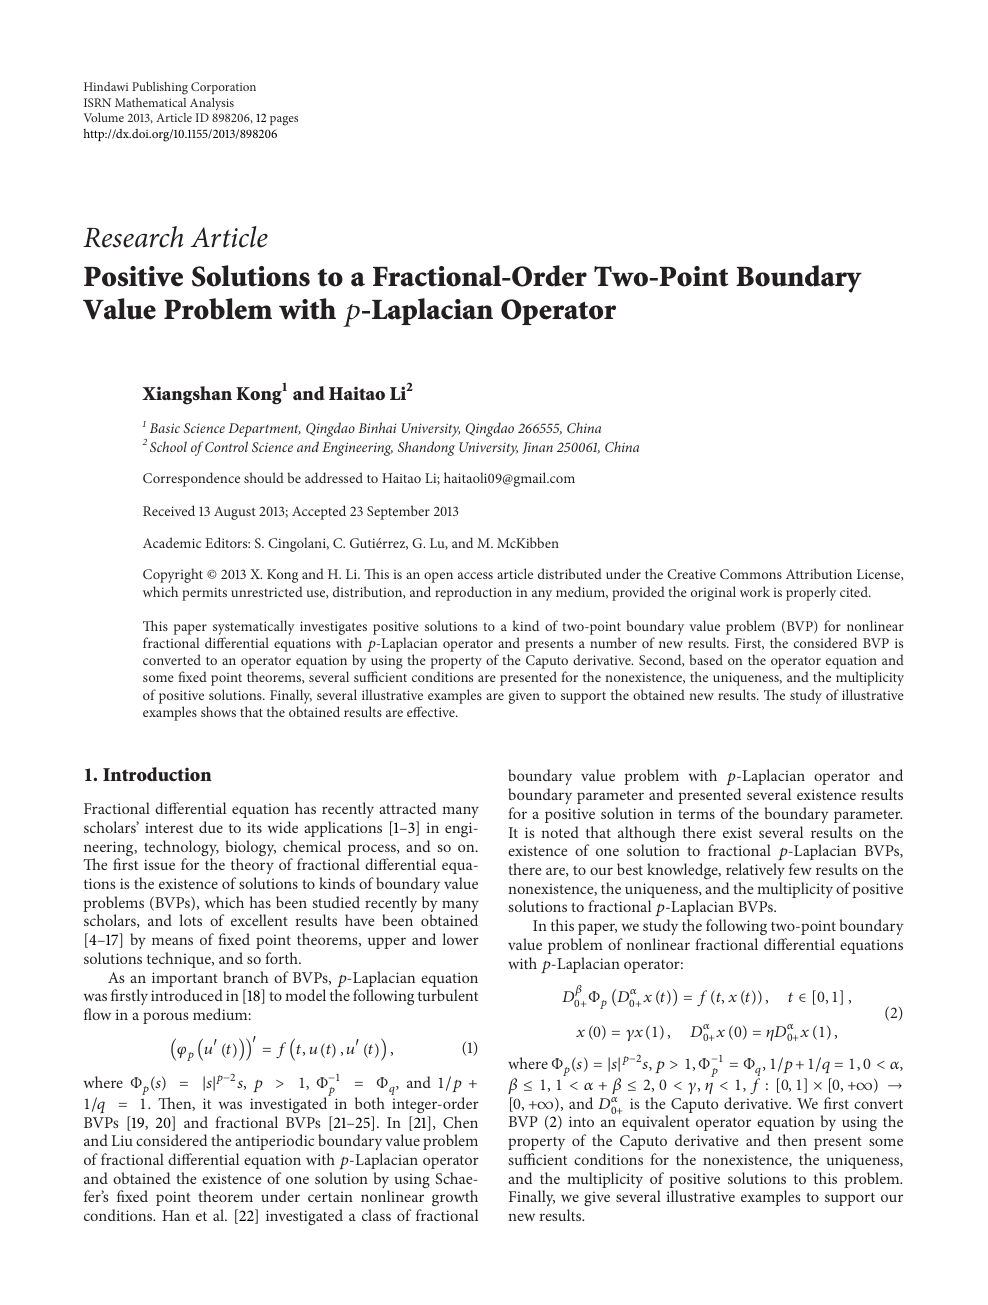 Positive Solutions To A Fractional Order Two Point Boundary Value Problem With P Laplacian Operator Topic Of Research Paper In Mathematics Download Scholarly Article Pdf And Read For Free On Cyberleninka Open Science